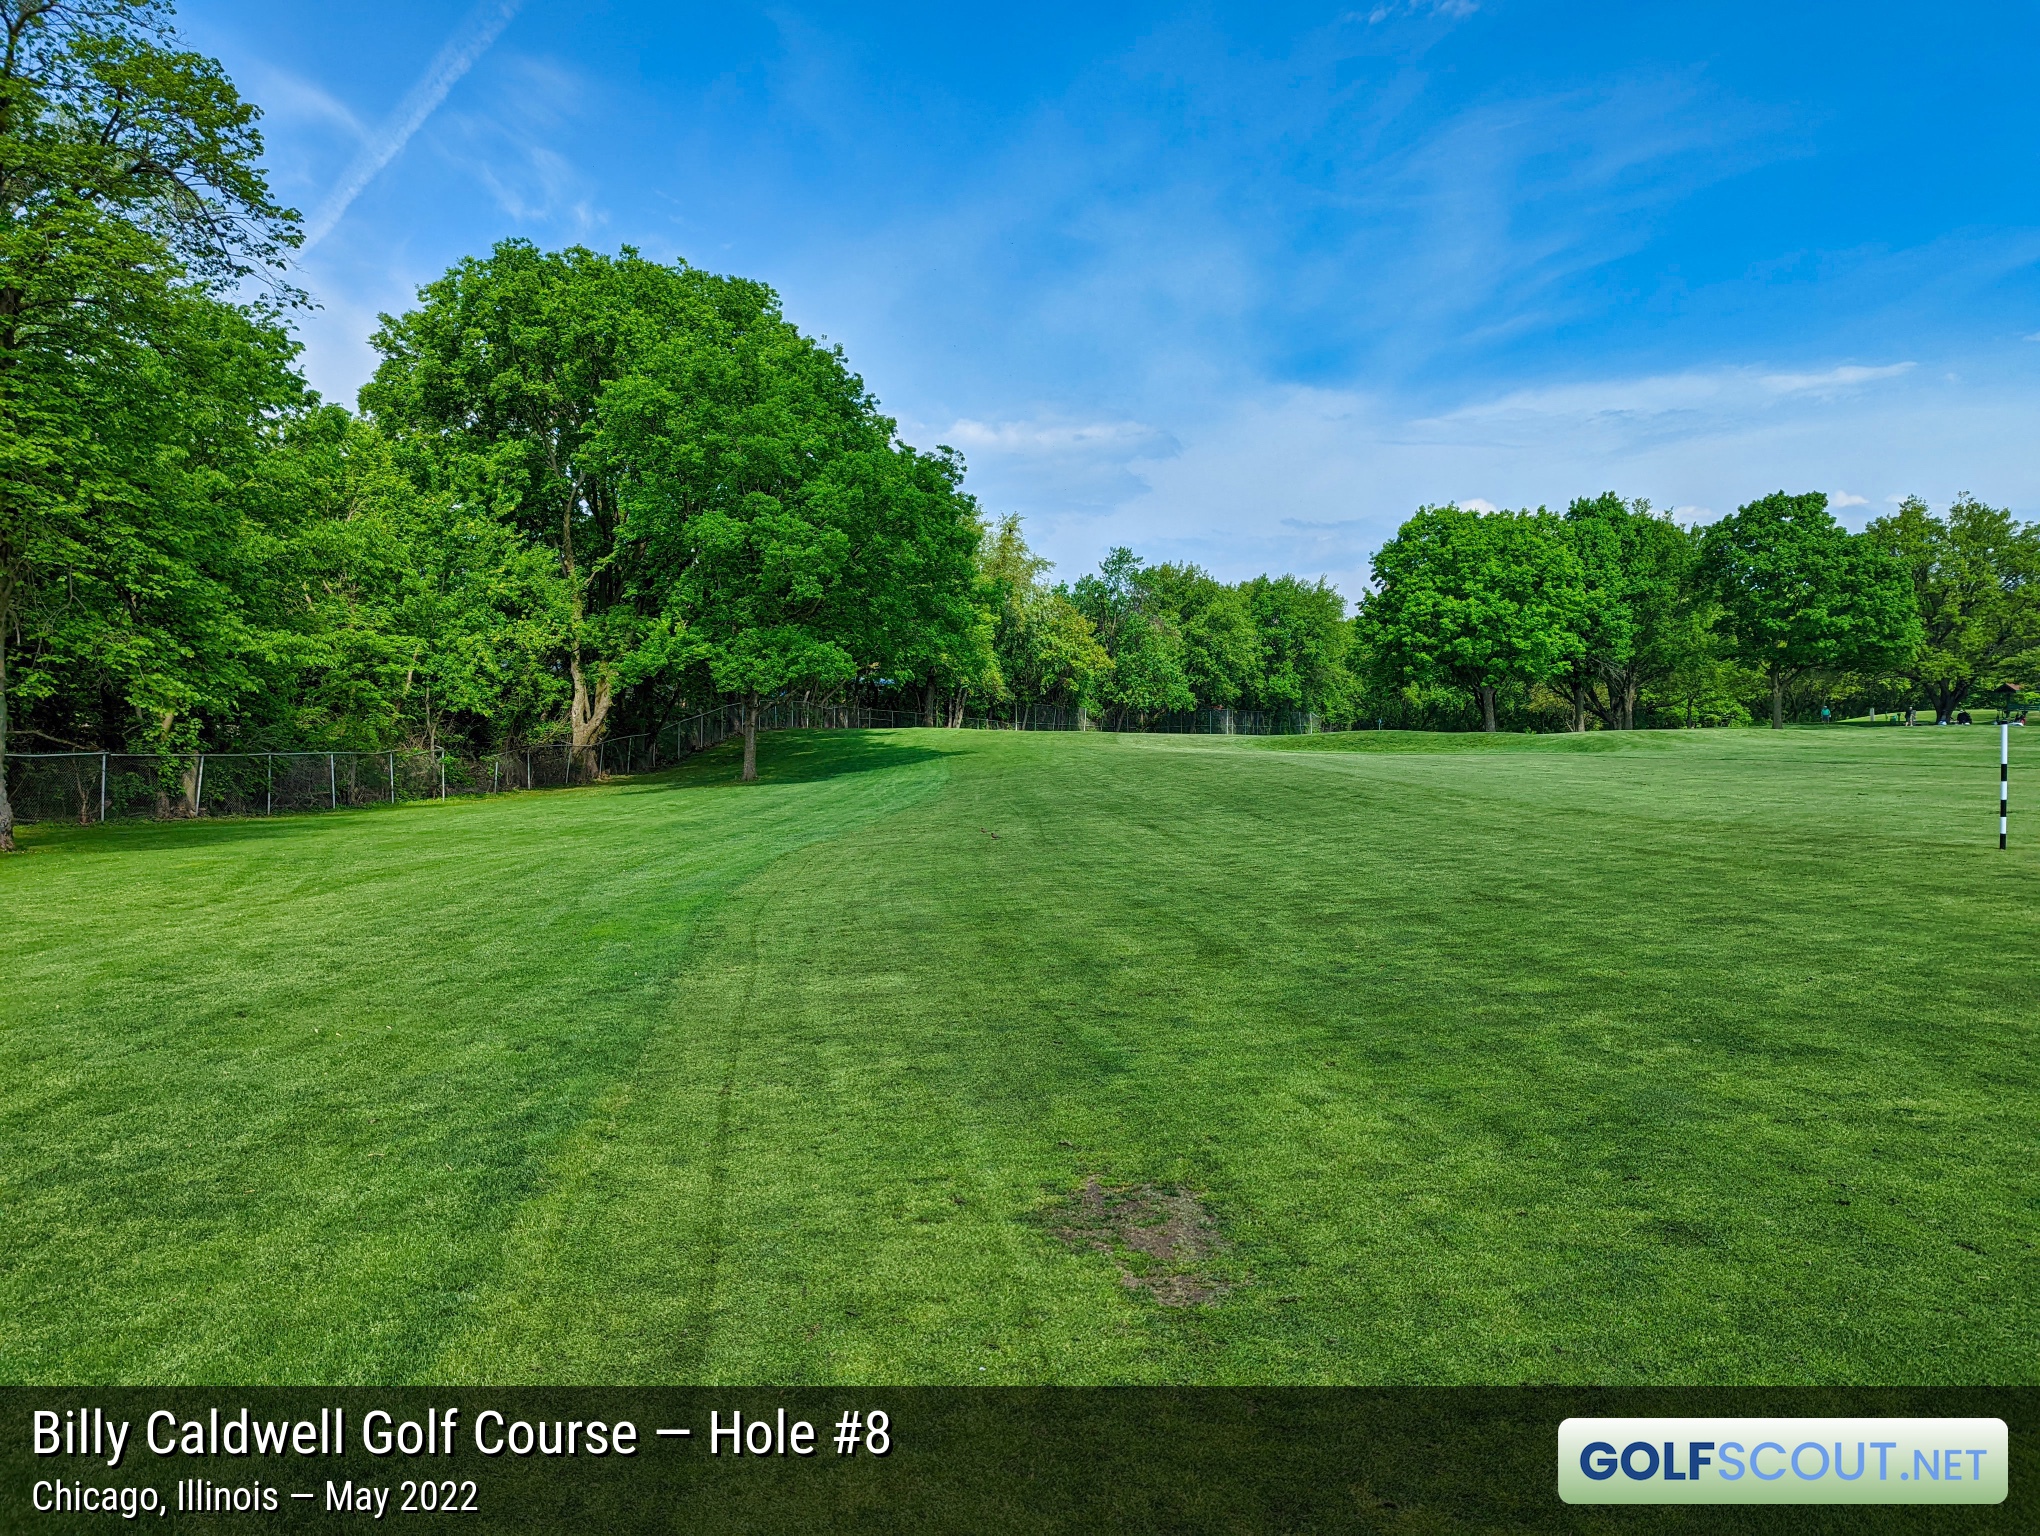 Photo of hole #8 at Billy Caldwell Golf Course in Chicago, Illinois. 